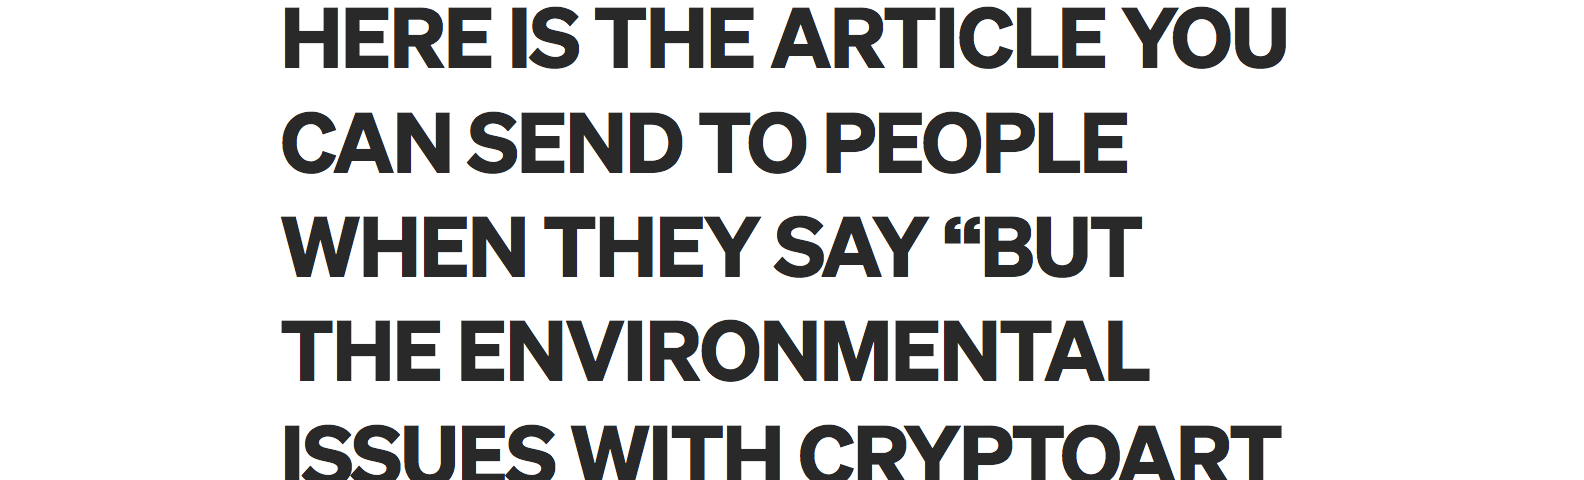 HERE IS THE ARTICLE YOU CAN SEND TO PEOPLE WHEN THEY SAY “BUT THE ENVIRONMENTAL ISSUES WITH CRYPTOART WILL BE SOLVED SOON, RIGHT?”